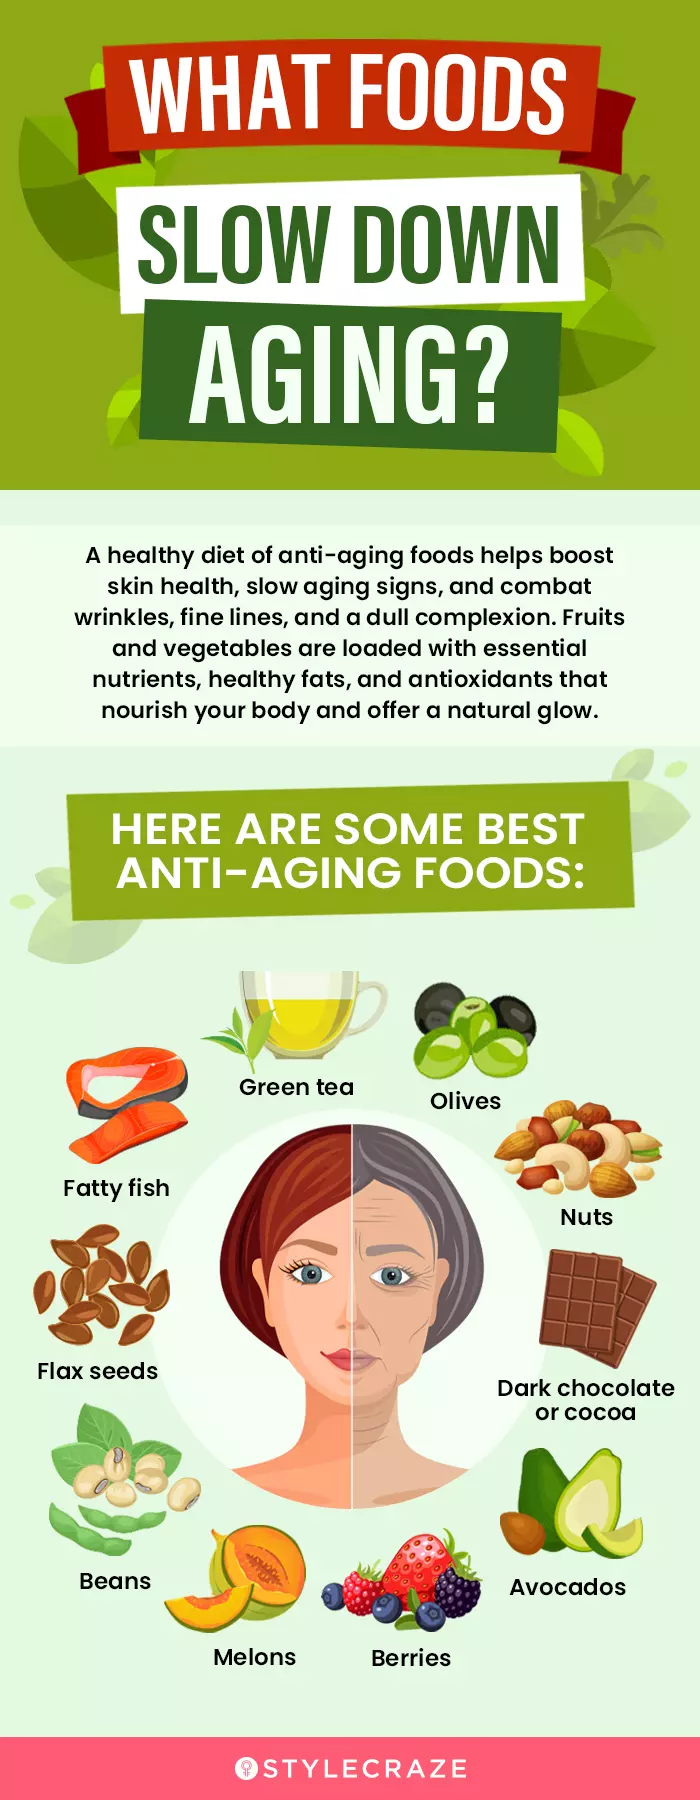 what foods slow down aging (infographic)